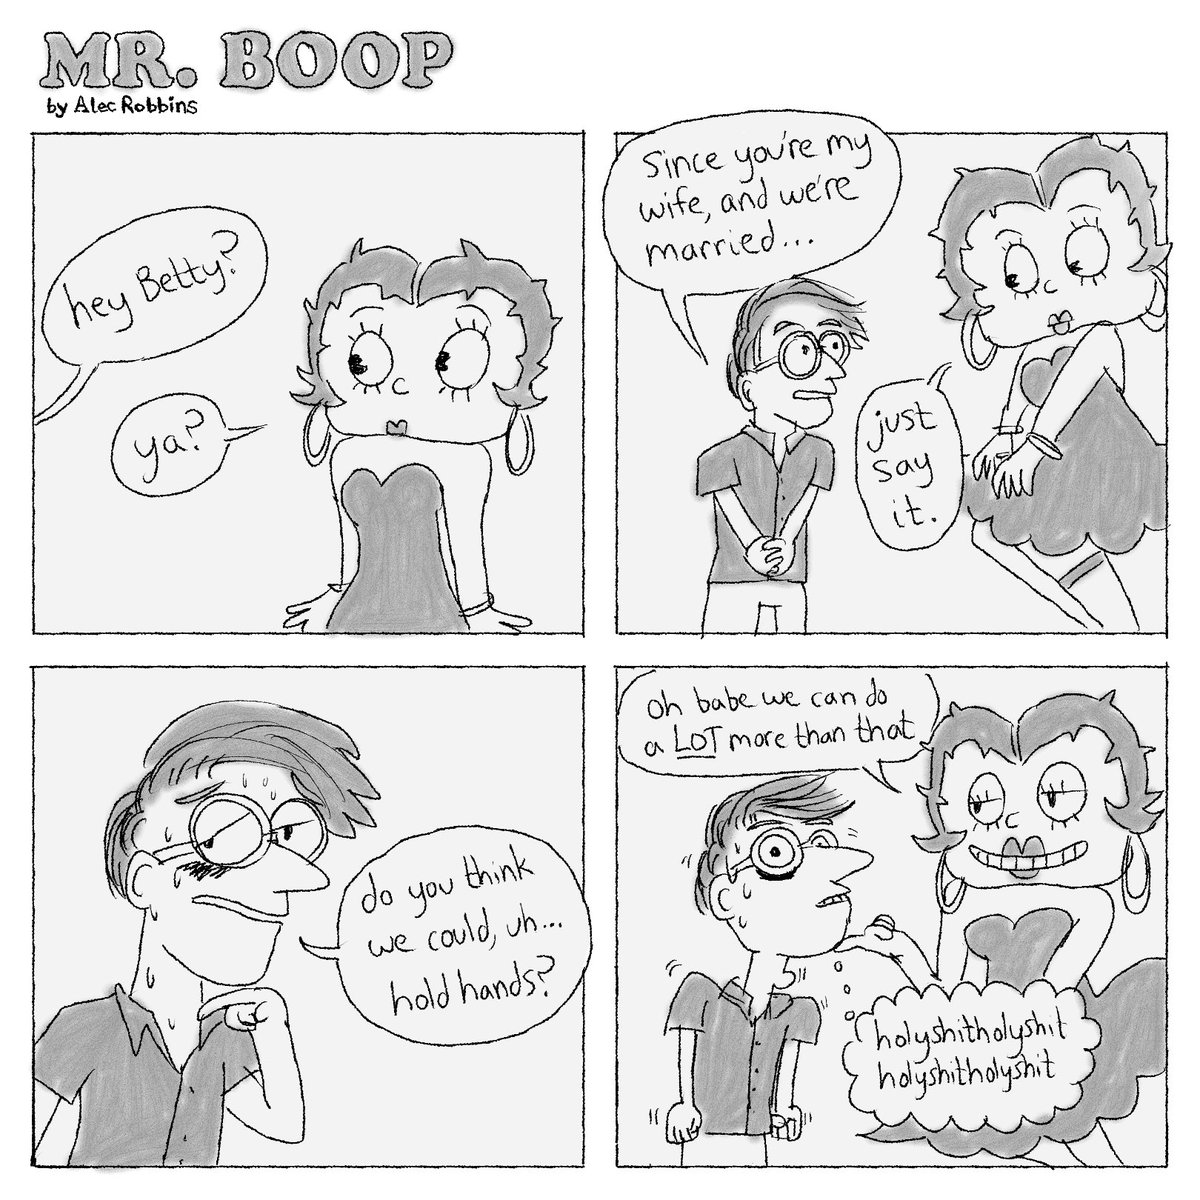 just got back from the Boop Mines with another one for you